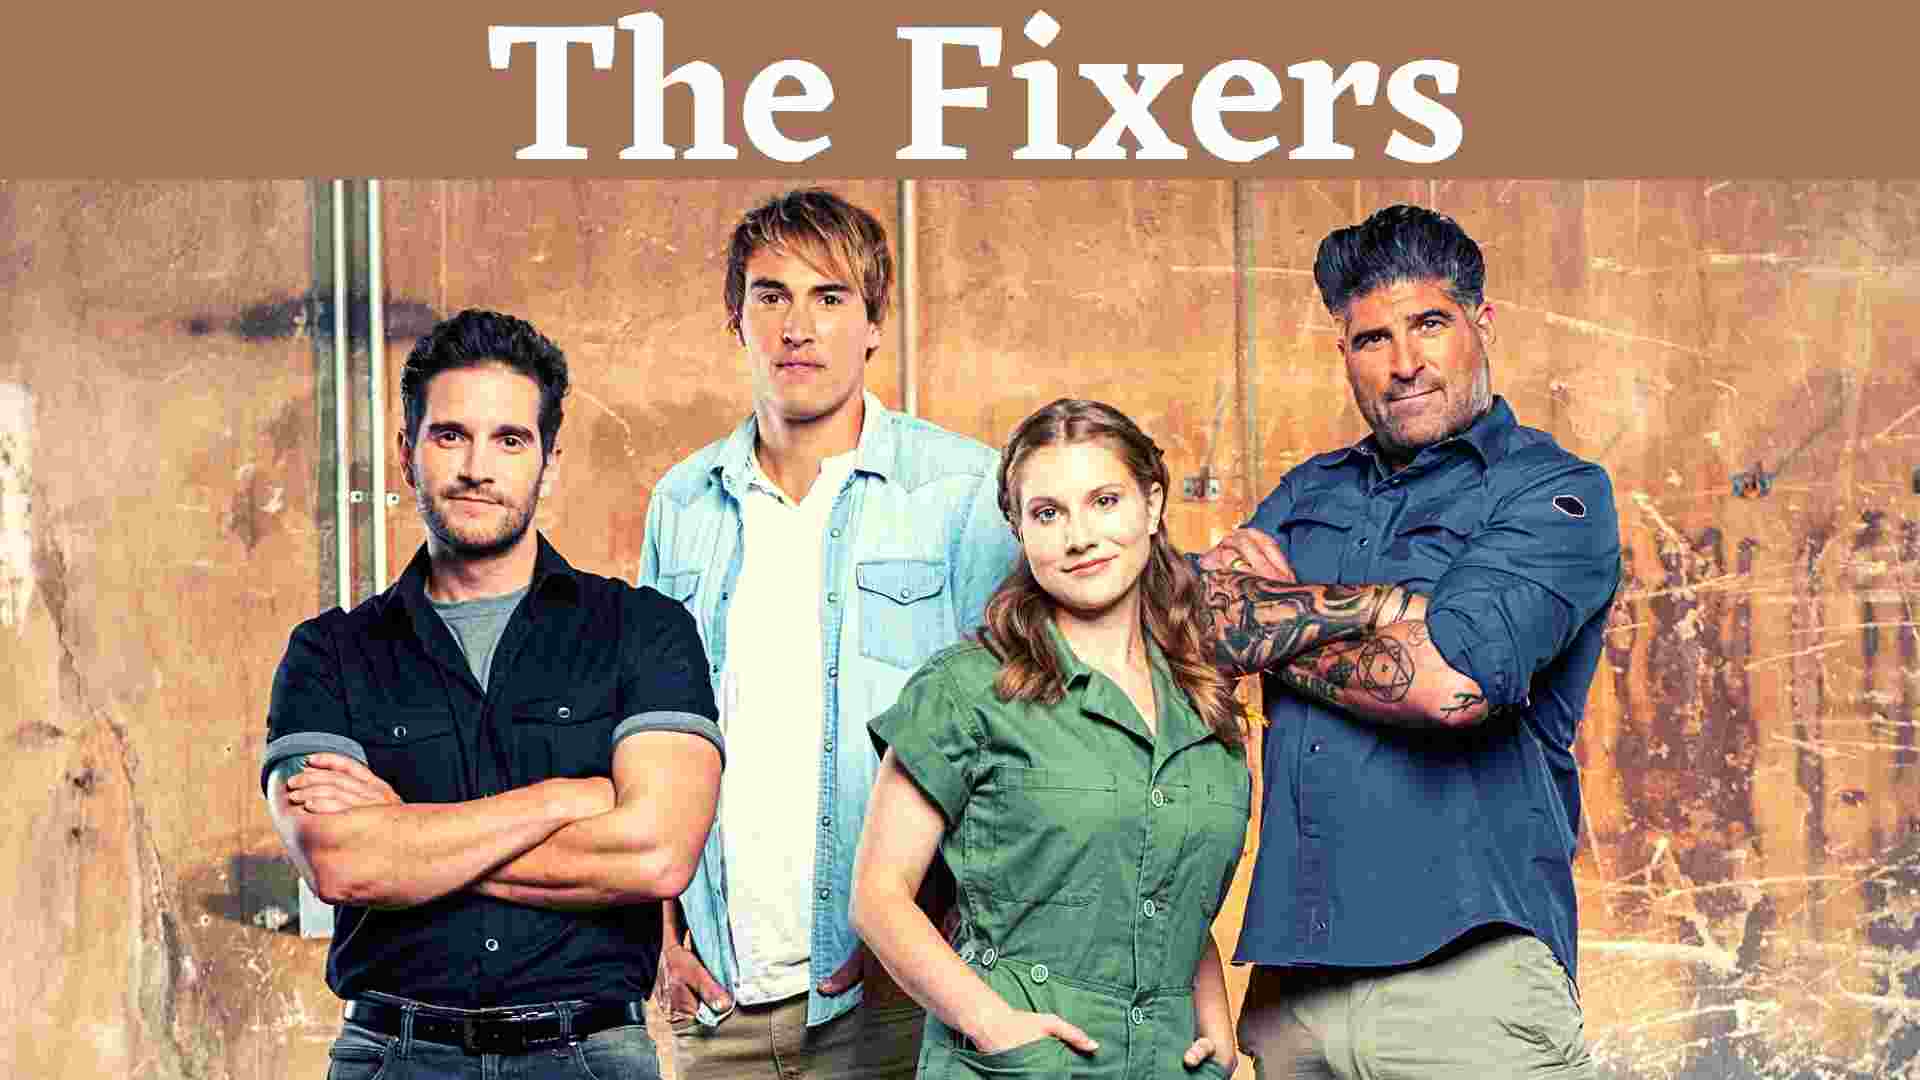 The Fixers Parents guide and Age Rating | 2019